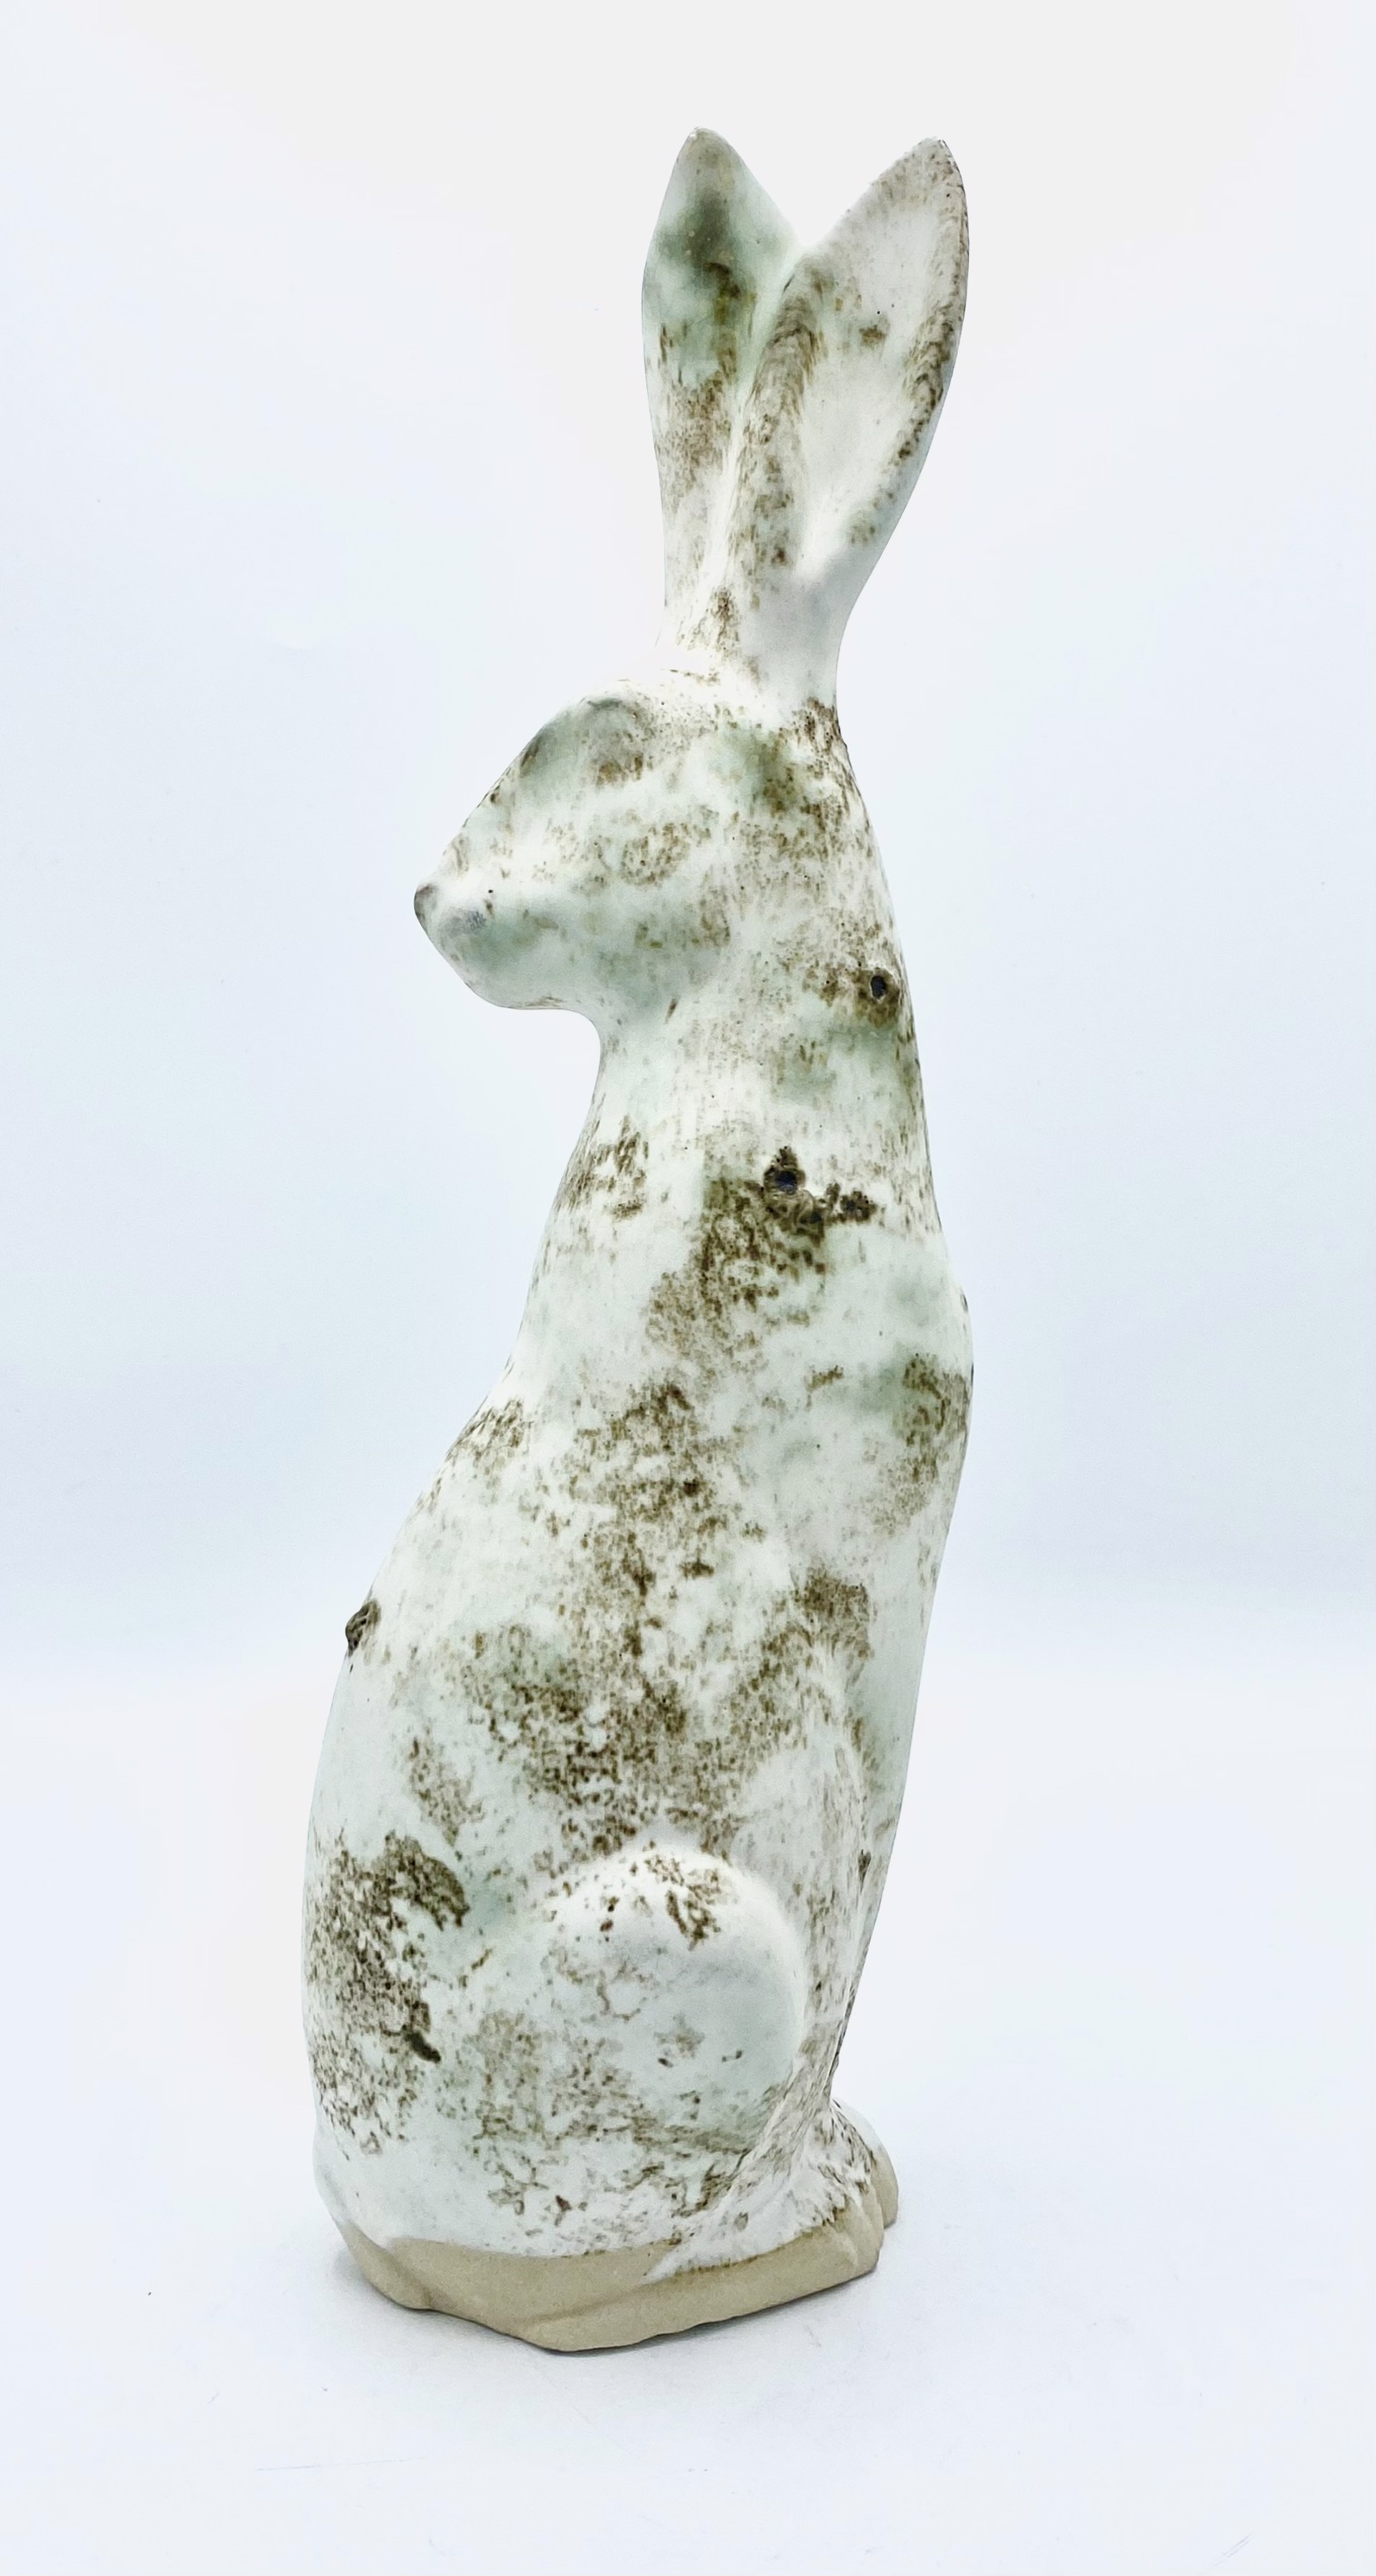 Tall Rabbit 2 by Satterfield Pottery